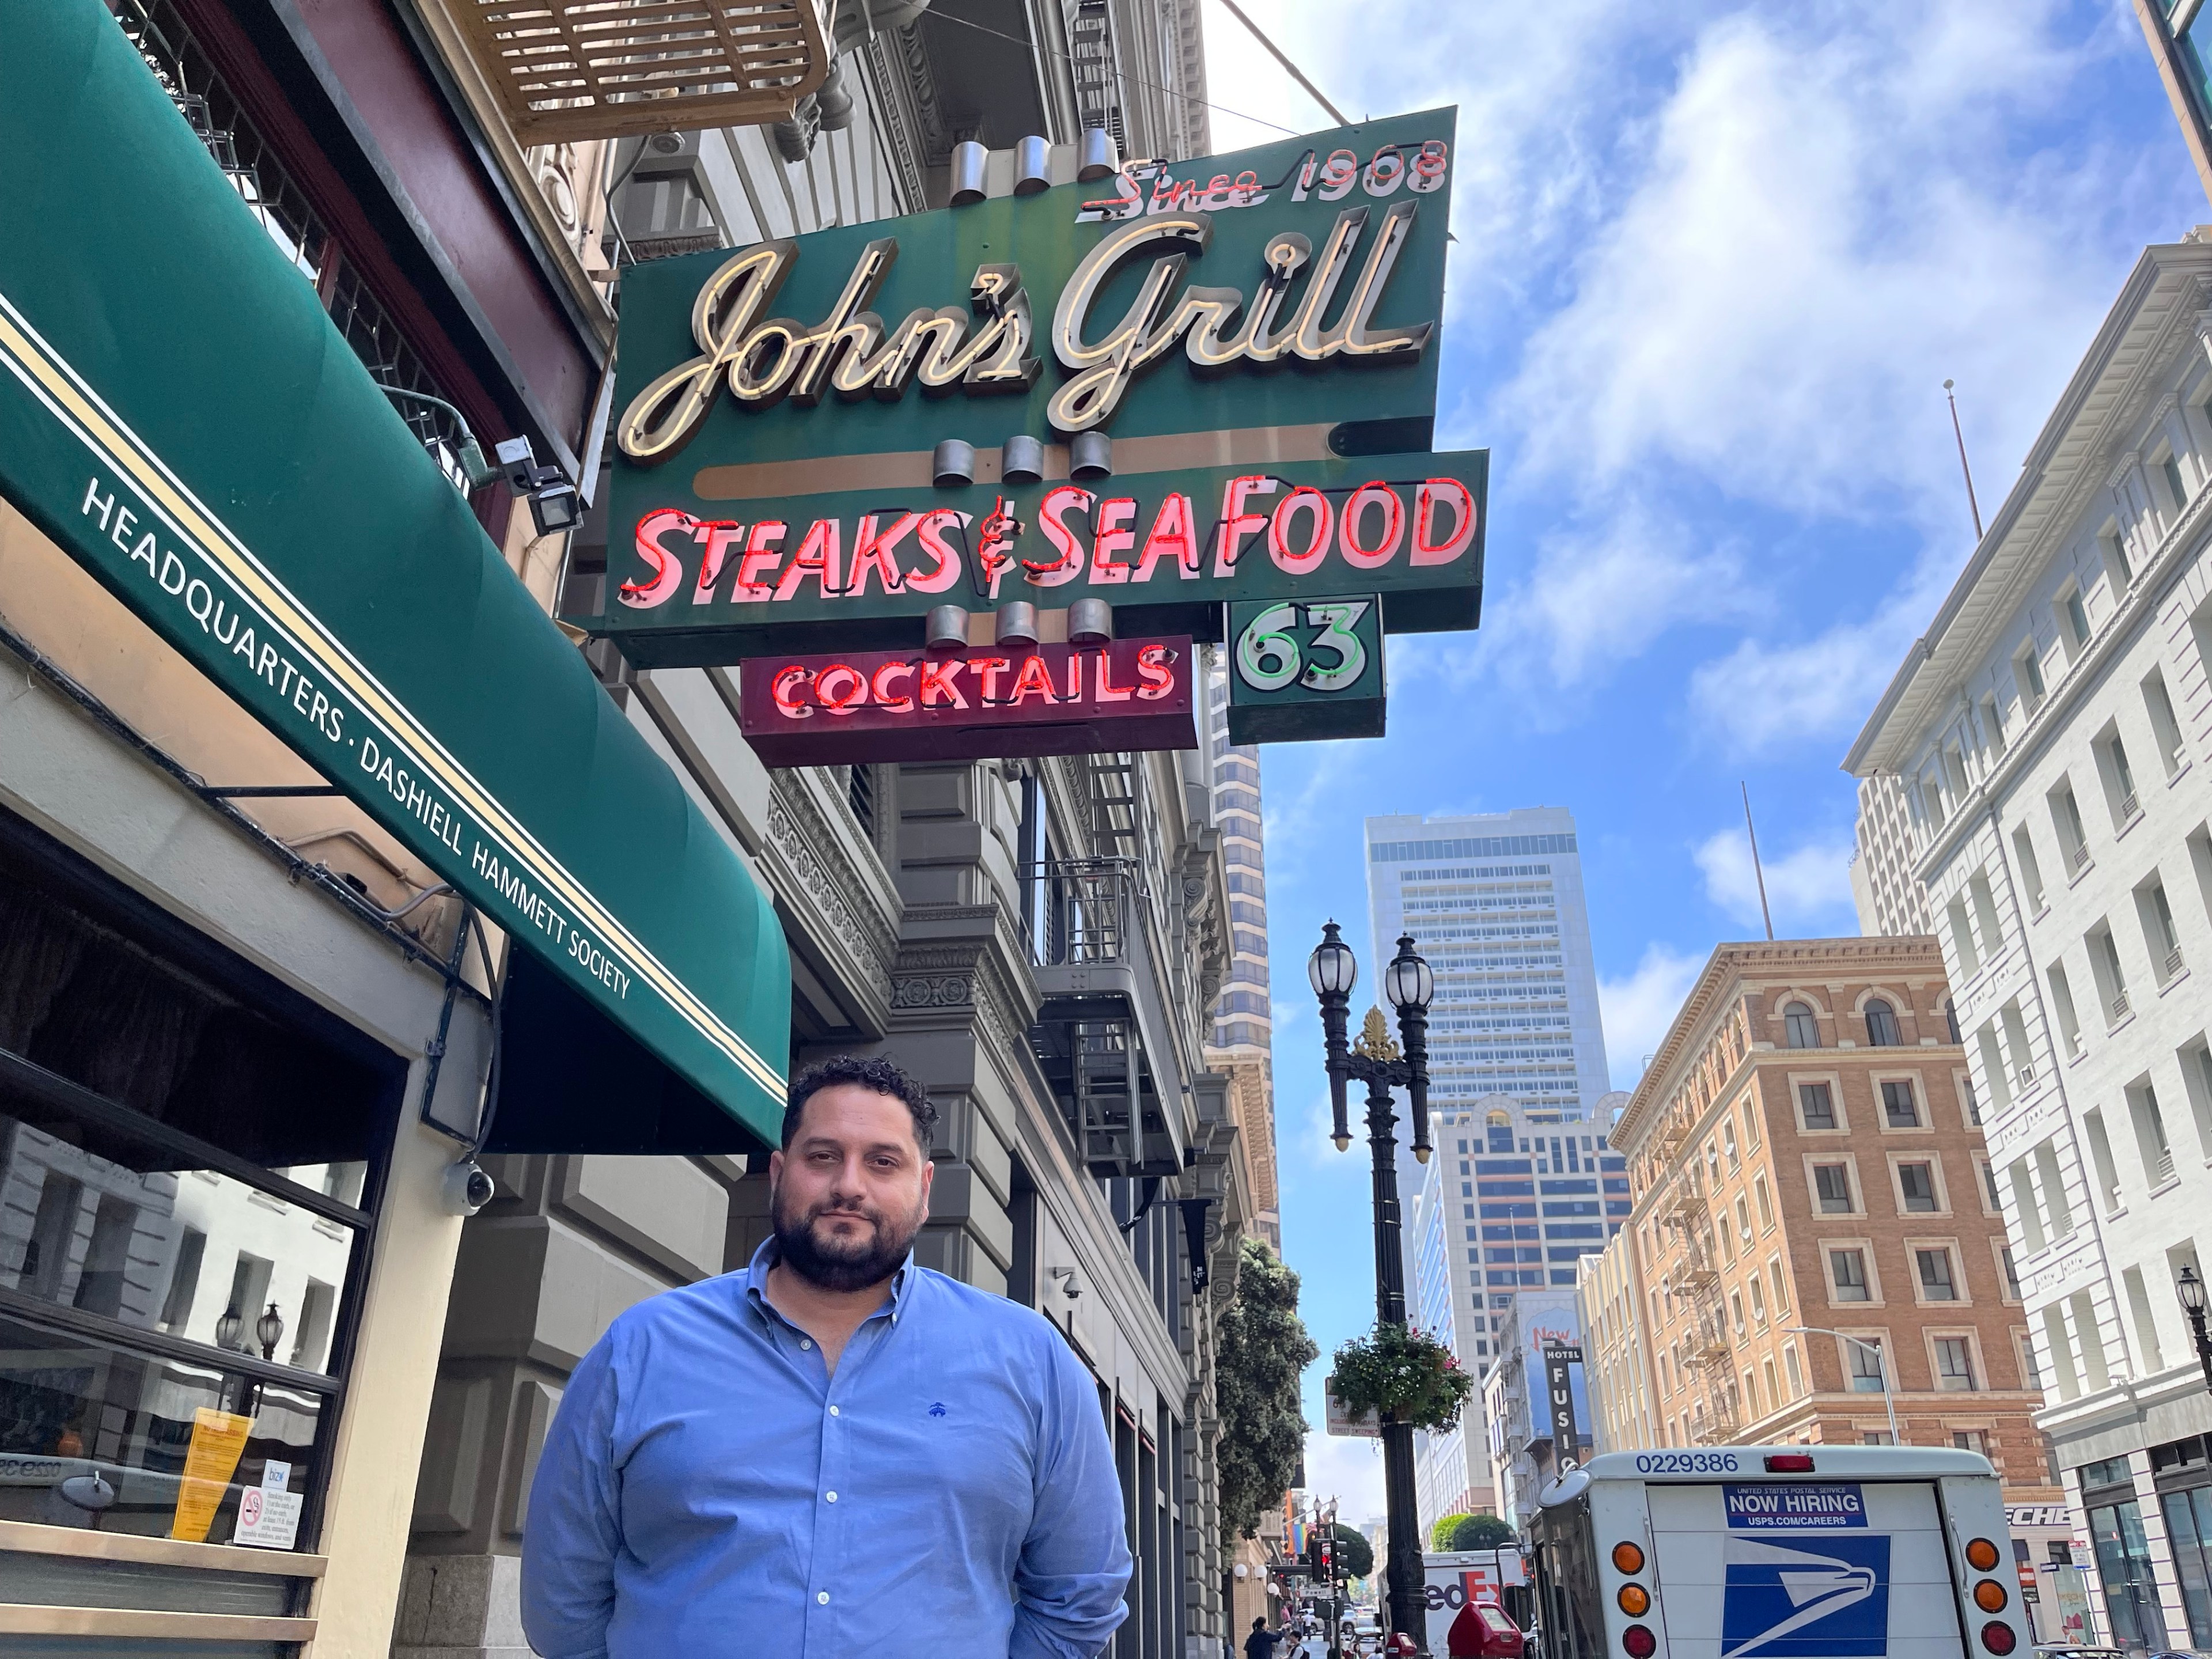 John’s Grill Celebrates 115 Years in San Francisco With Free Lunch, Drinks